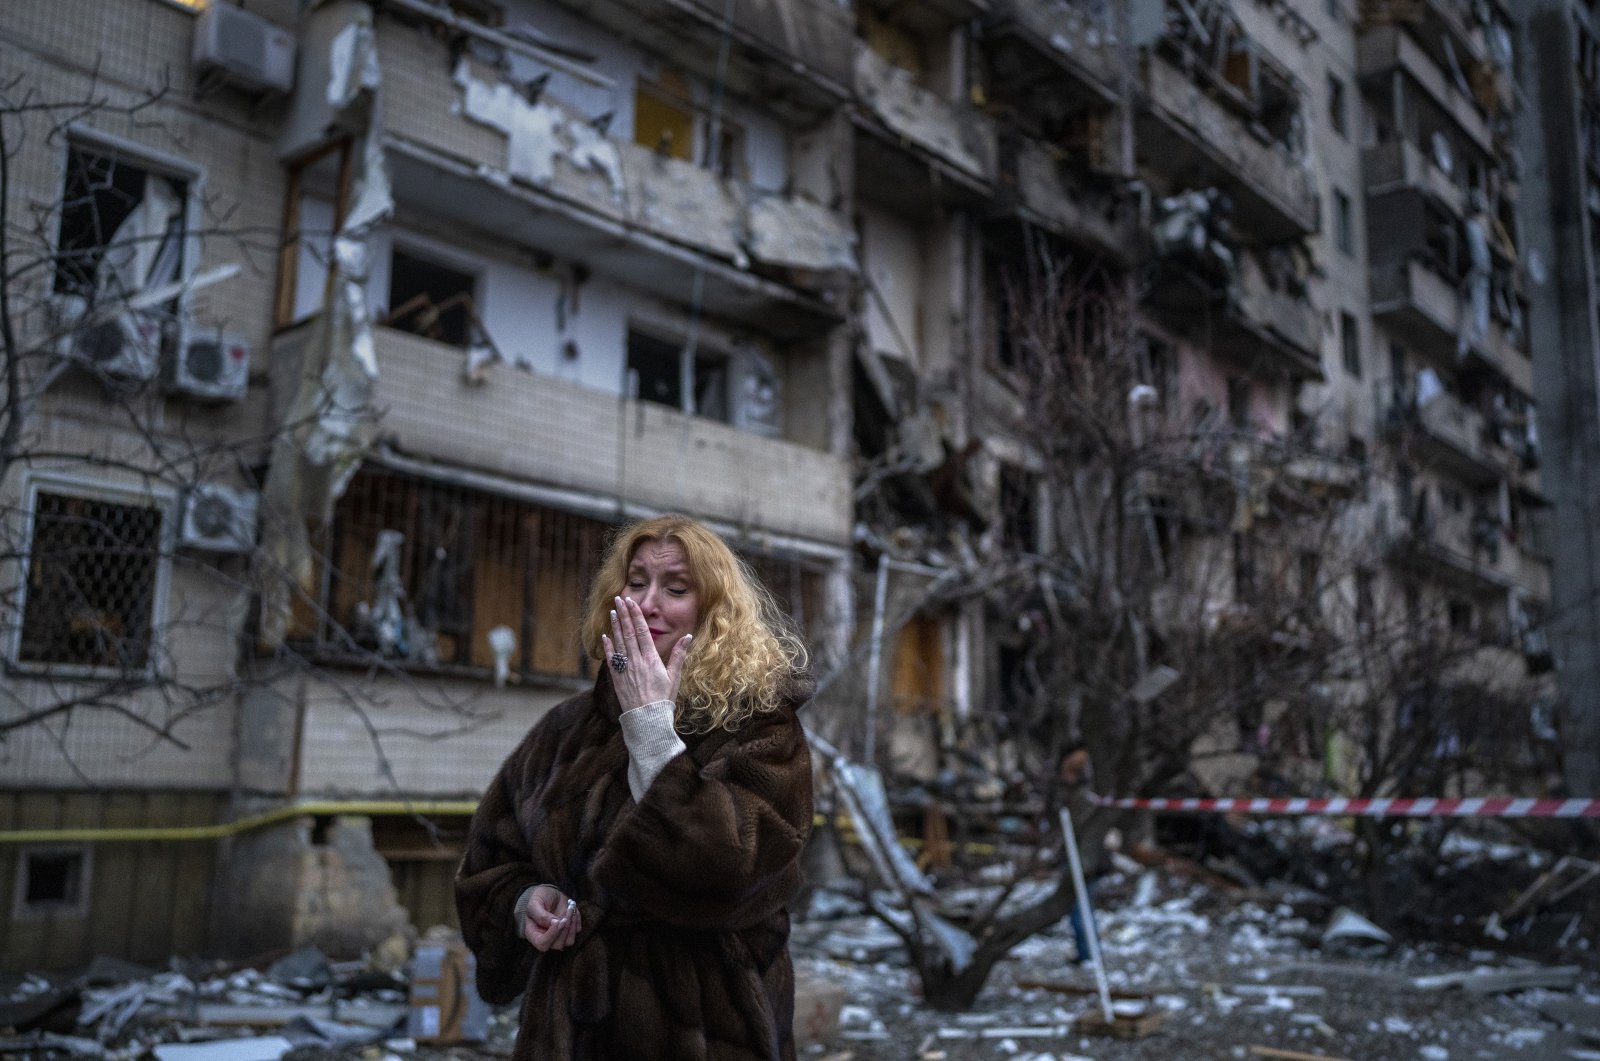 Natali Sevriukova reacts next to her house following a rocket attack the city of Kyiv, Ukraine, Friday, Feb. 25, 2022. (AP Photo)